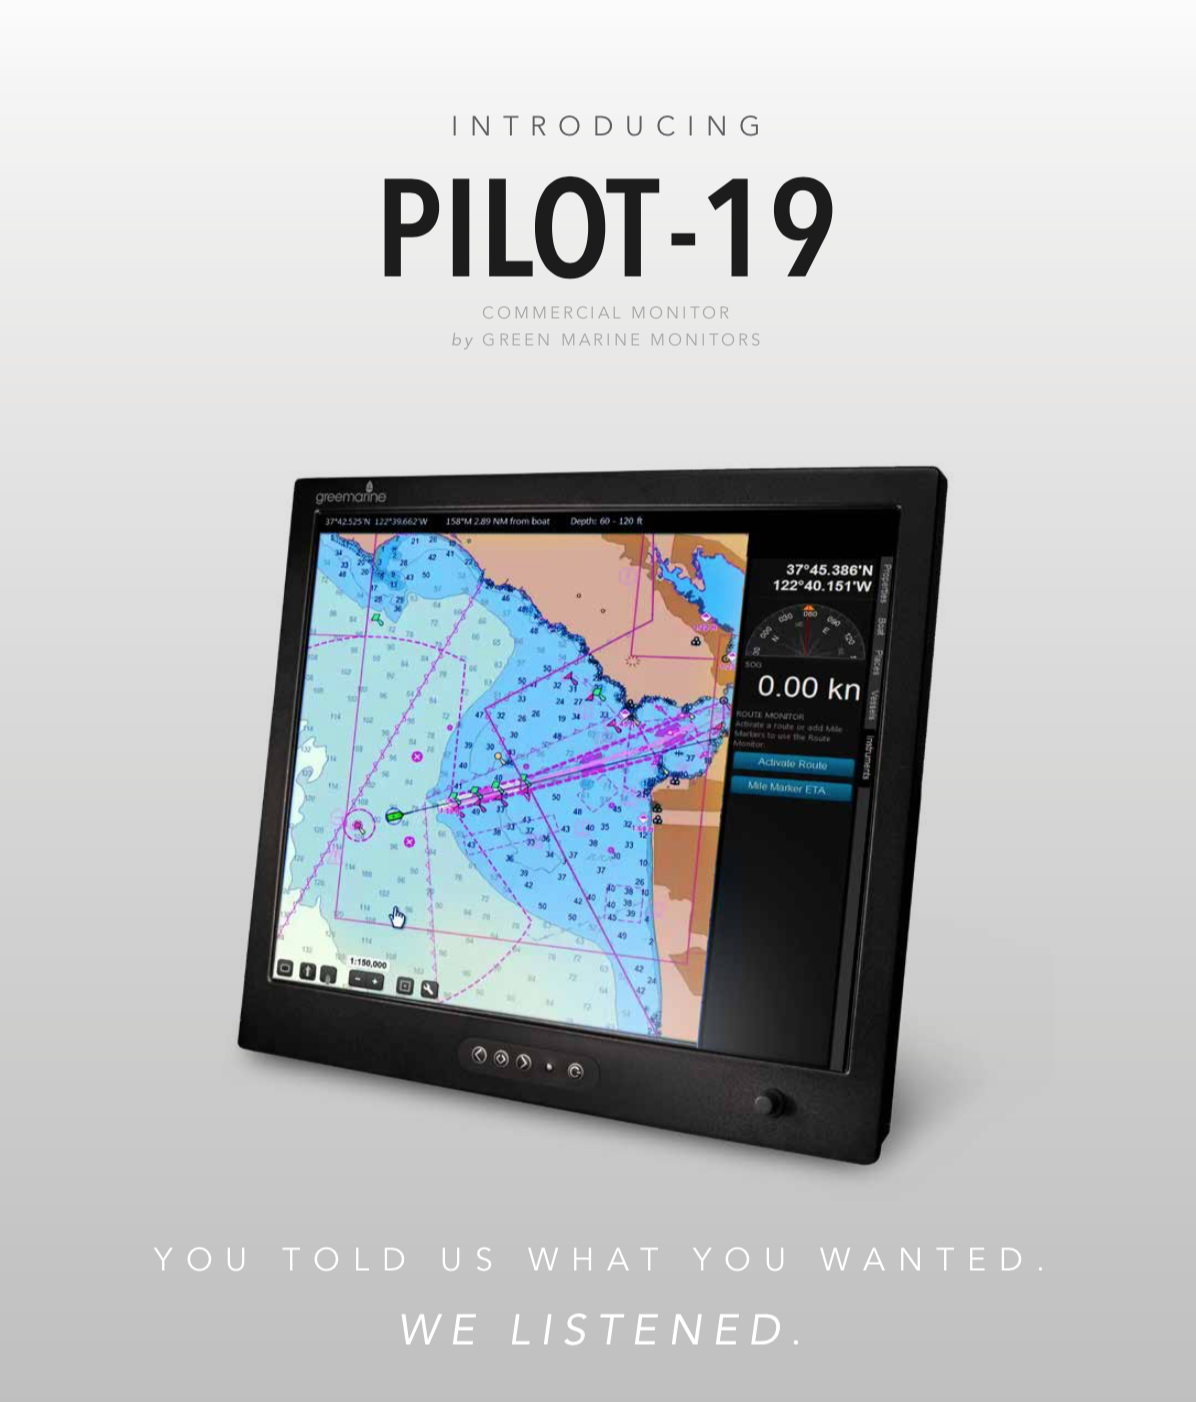 The new PILOT-19 commercial marine monitor